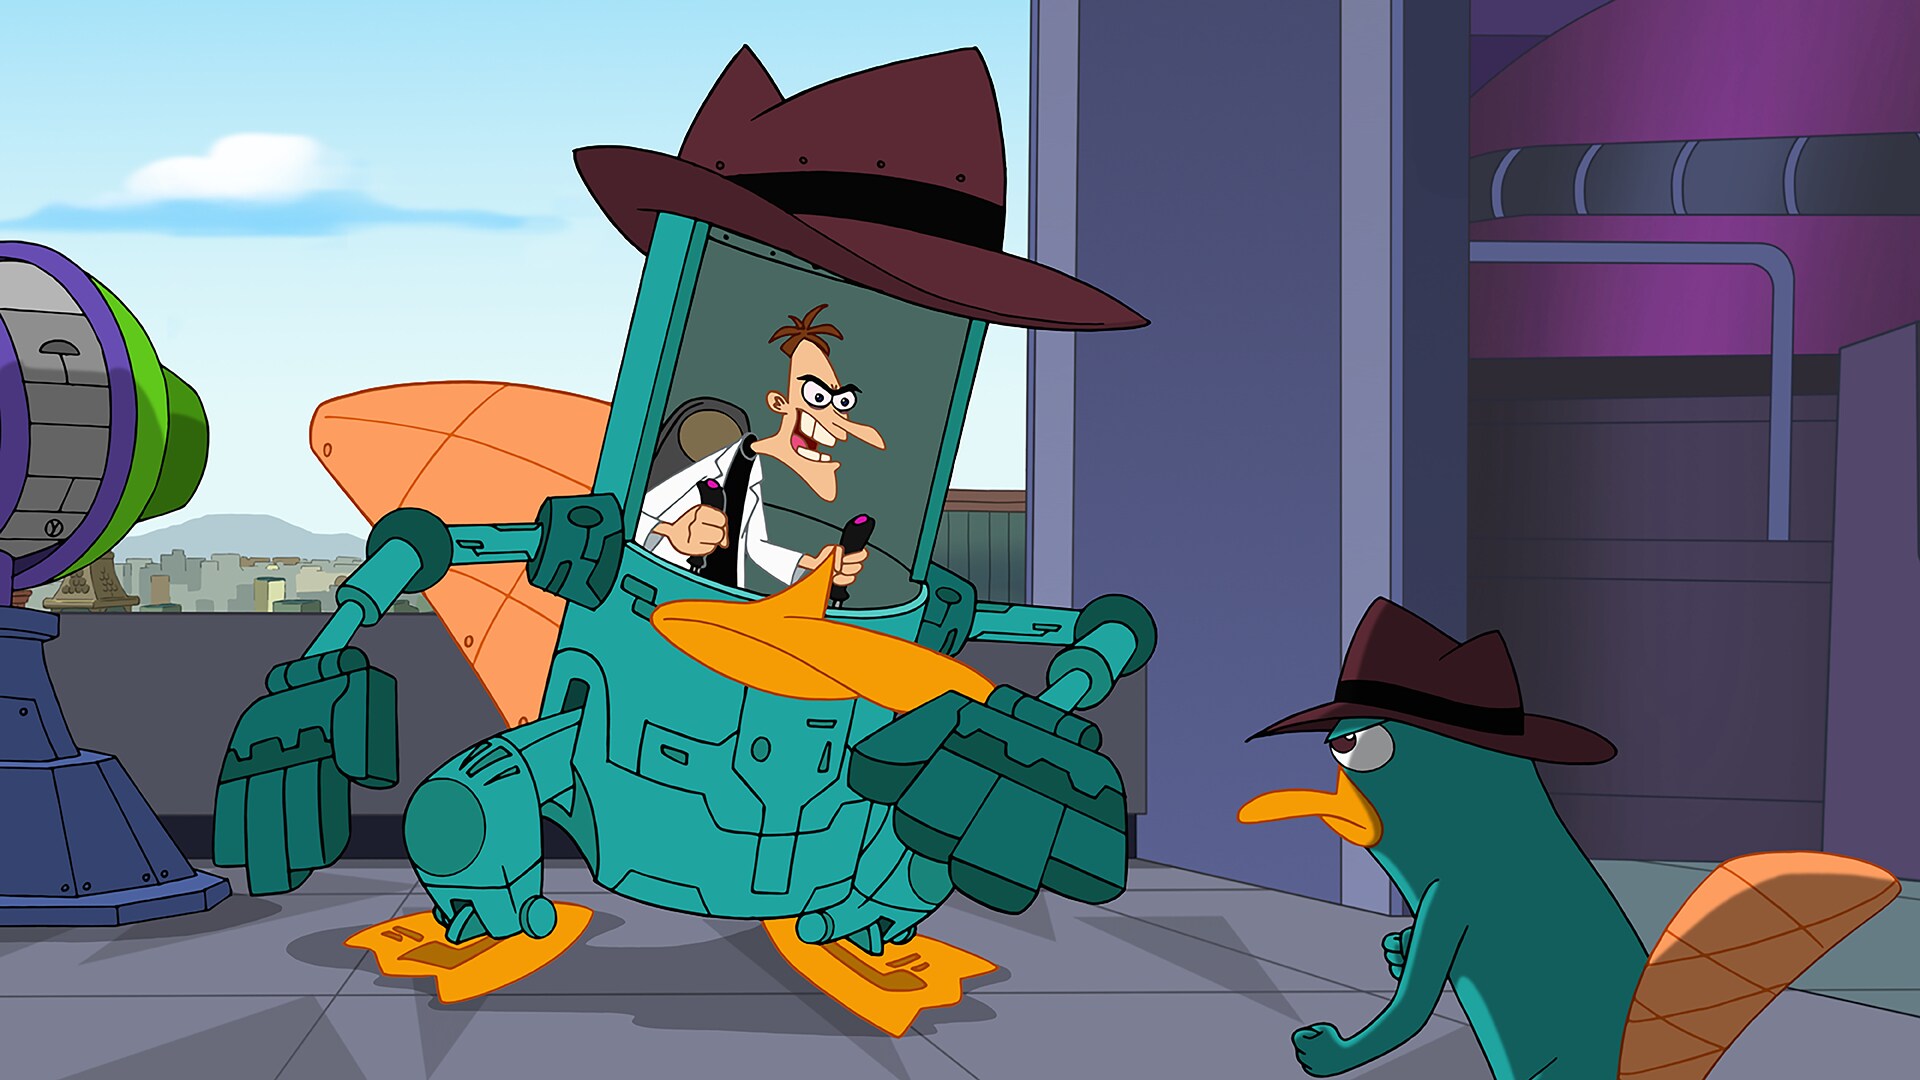 PHINEAS AND FERB THE MOVIE: CANDACE AGAINST THE UNIVERSE - Executive-produced by the creators/executive producers of the Emmy Award-winning "Phineas and Ferb" series, Dan Povenmire and Jeff "Swampy" Marsh, "Phineas and Ferb The Movie: Candace Against the Universe" is an adventure story that tracks stepbrothers Phineas and Ferb as they set out across the galaxy to rescue their older sister Candace, who after being abducted by aliens, finds utopia in a far-off planet, free of pesky little brothers. (Disney+)